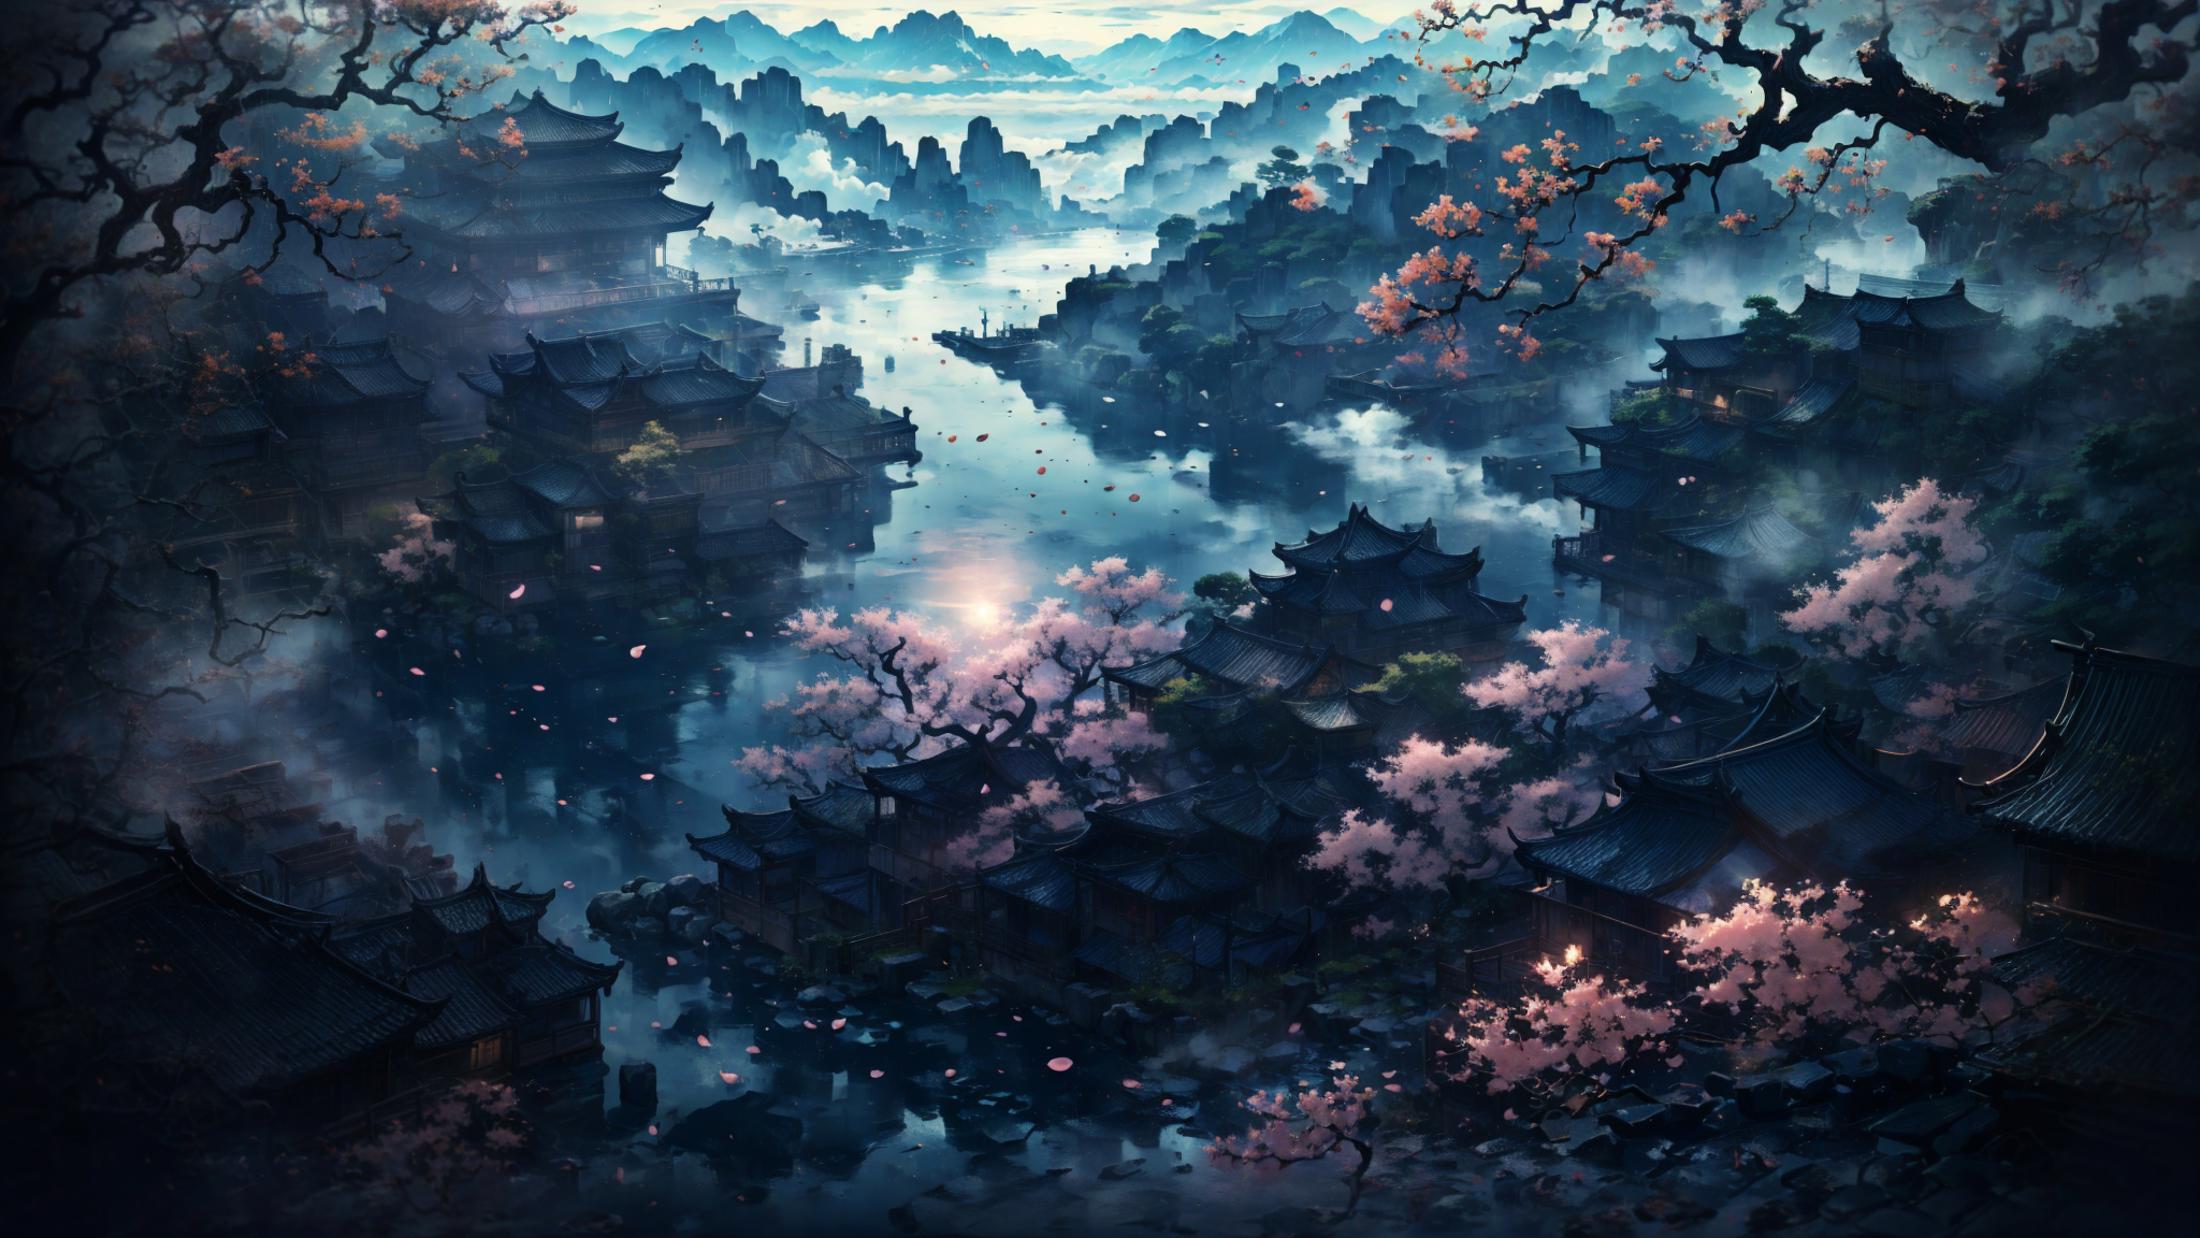 A beautiful painting of a city surrounded by water and mountains with flowering trees.